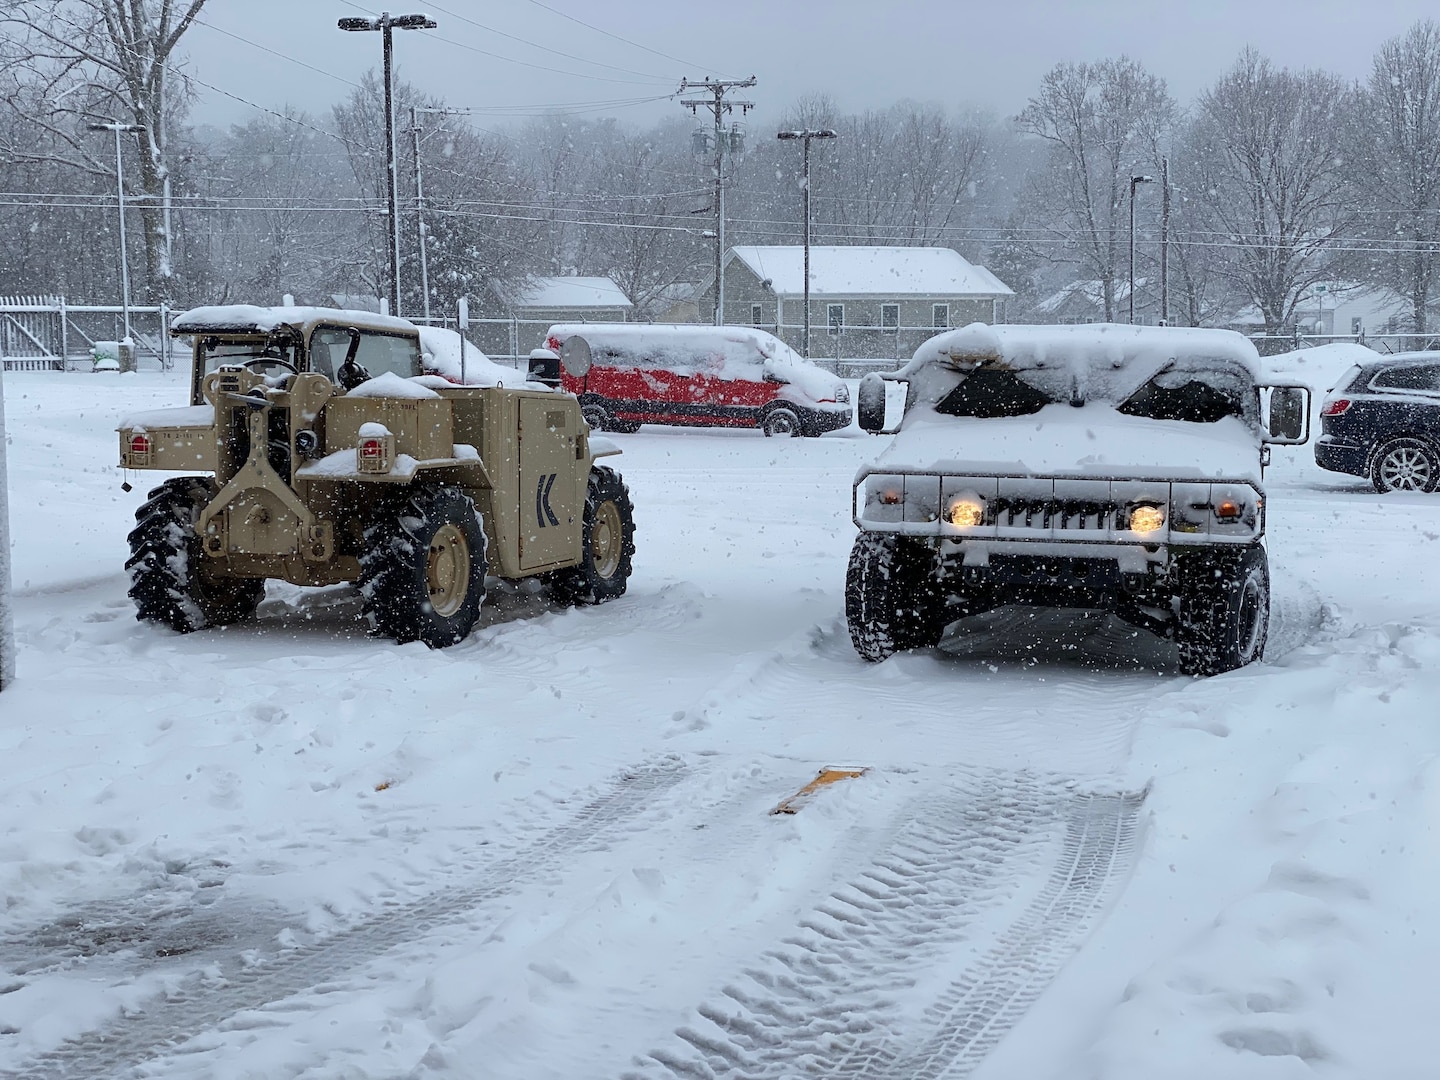 Indiana National Guardsmen mobilized to help Hoosiers during winter